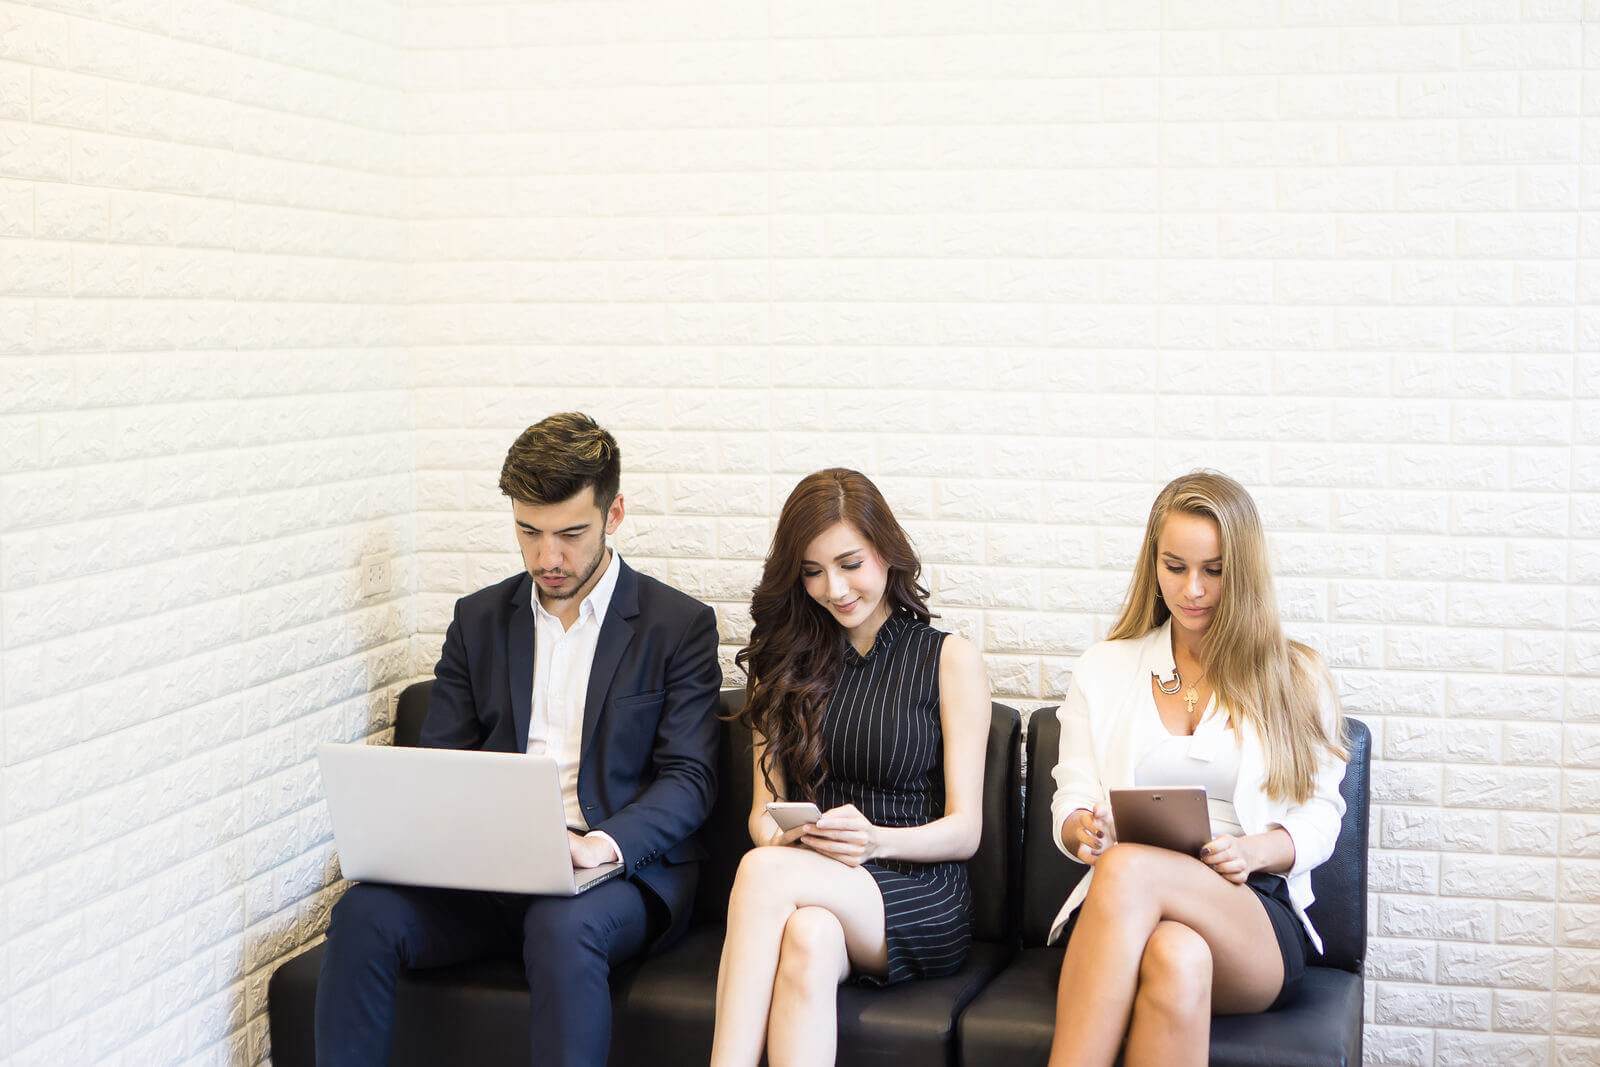 A Group Of Business People Sitting On A Bench With Laptops, Wondering About The 5 Types Of Copywriting.